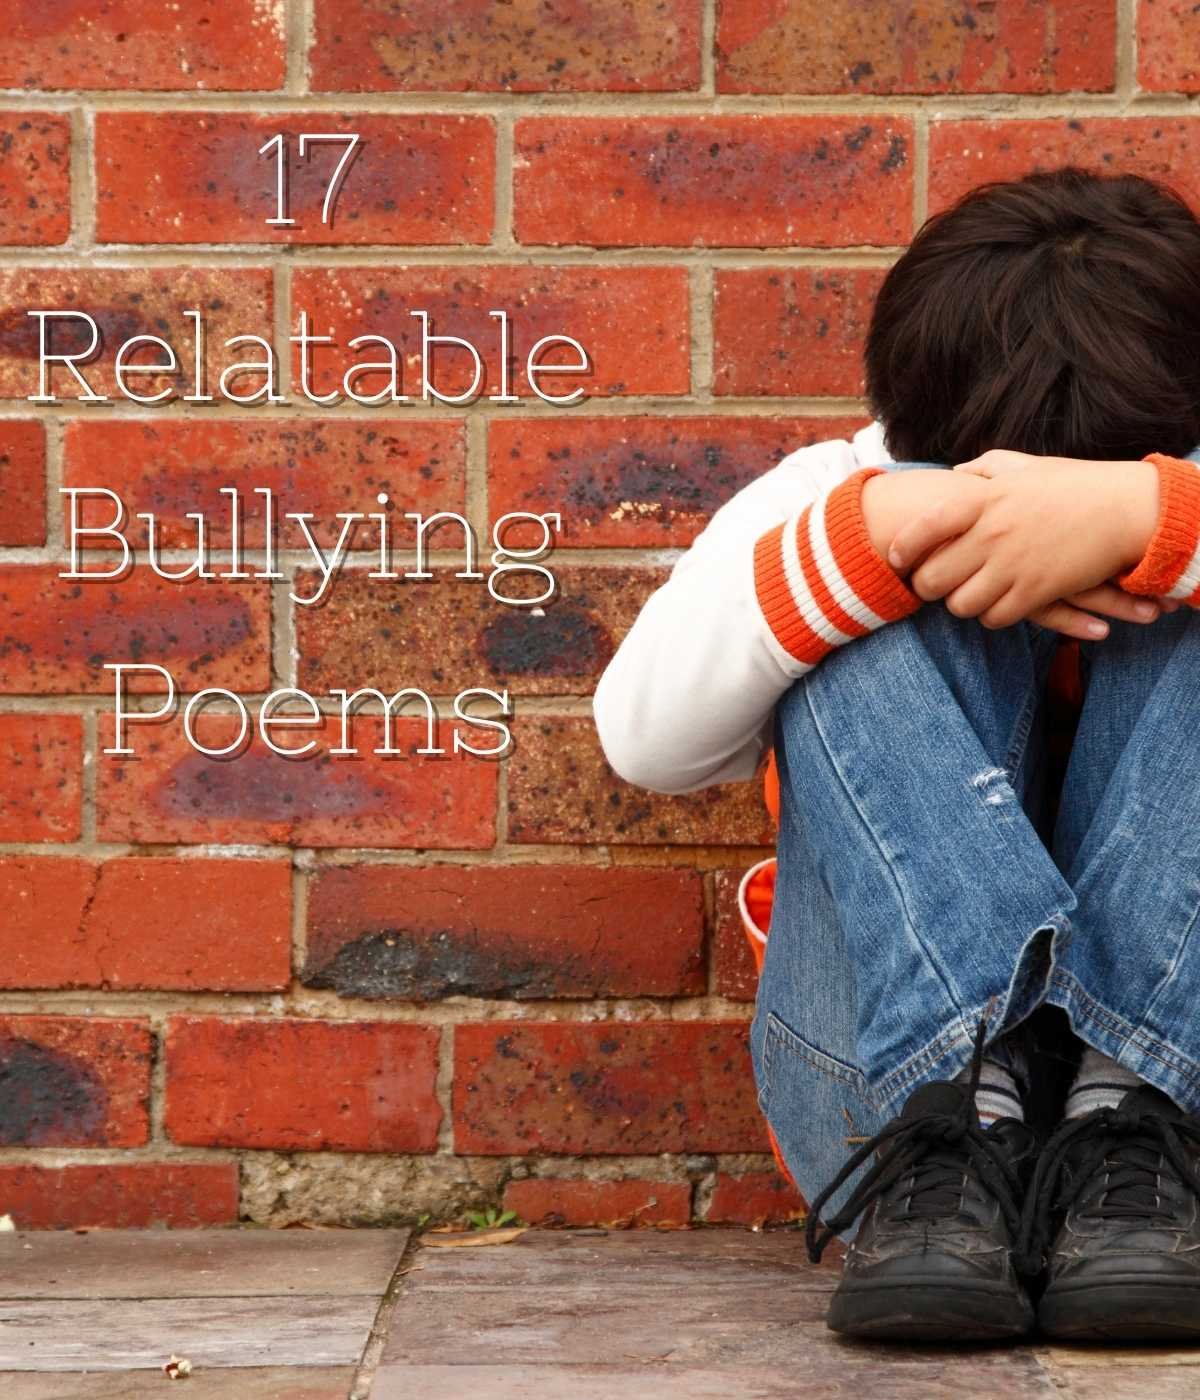 Bullying poems to help you deal